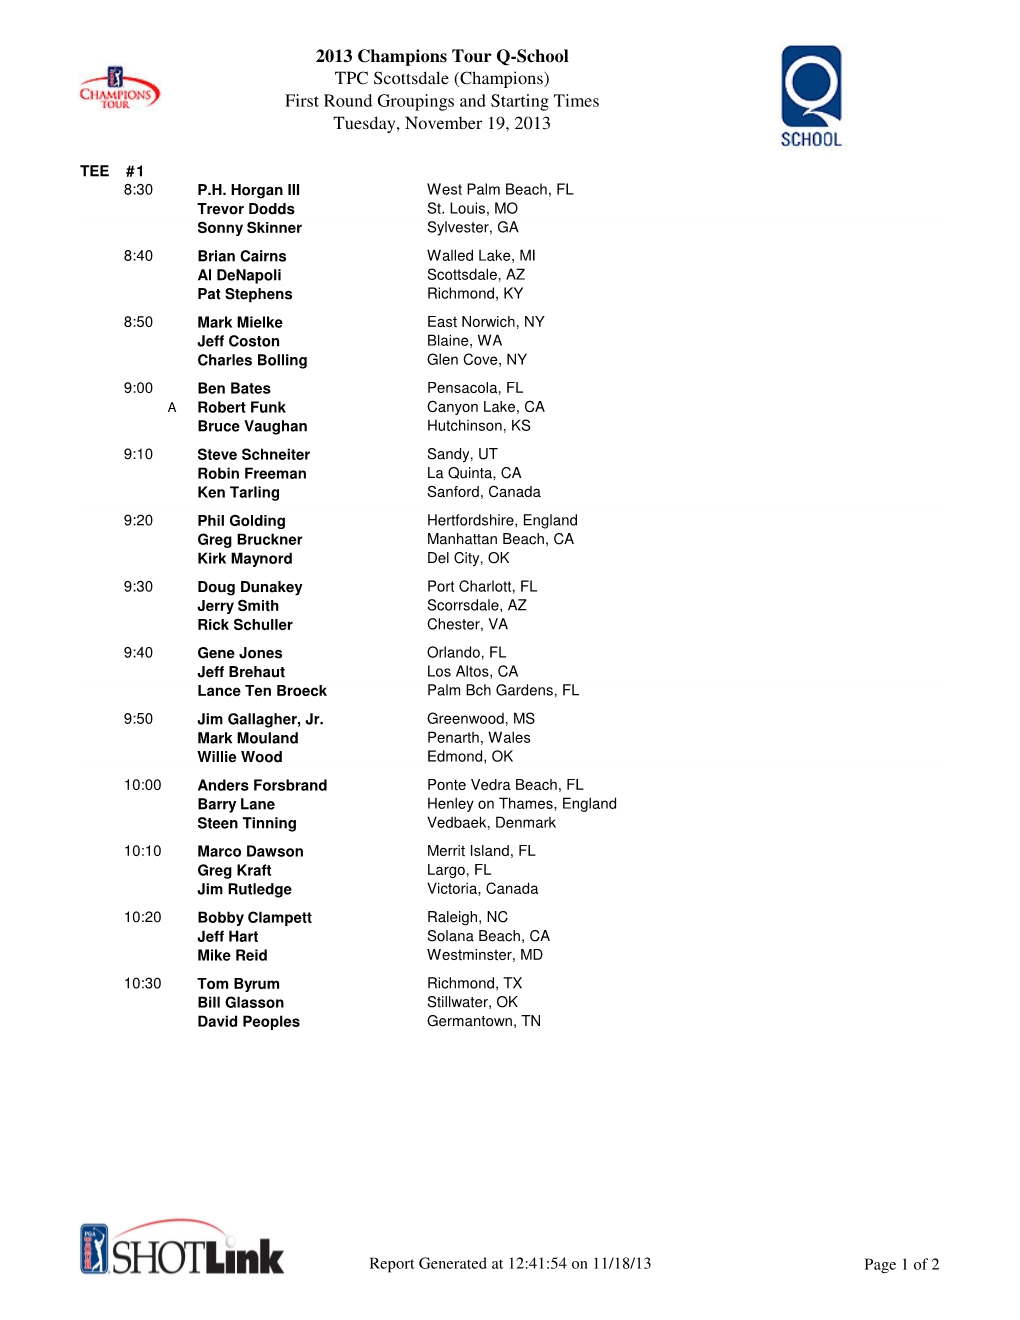 2013 Champions Tour Q-School TPC Scottsdale (Champions) First Round Groupings and Starting Times Tuesday, November 19, 2013